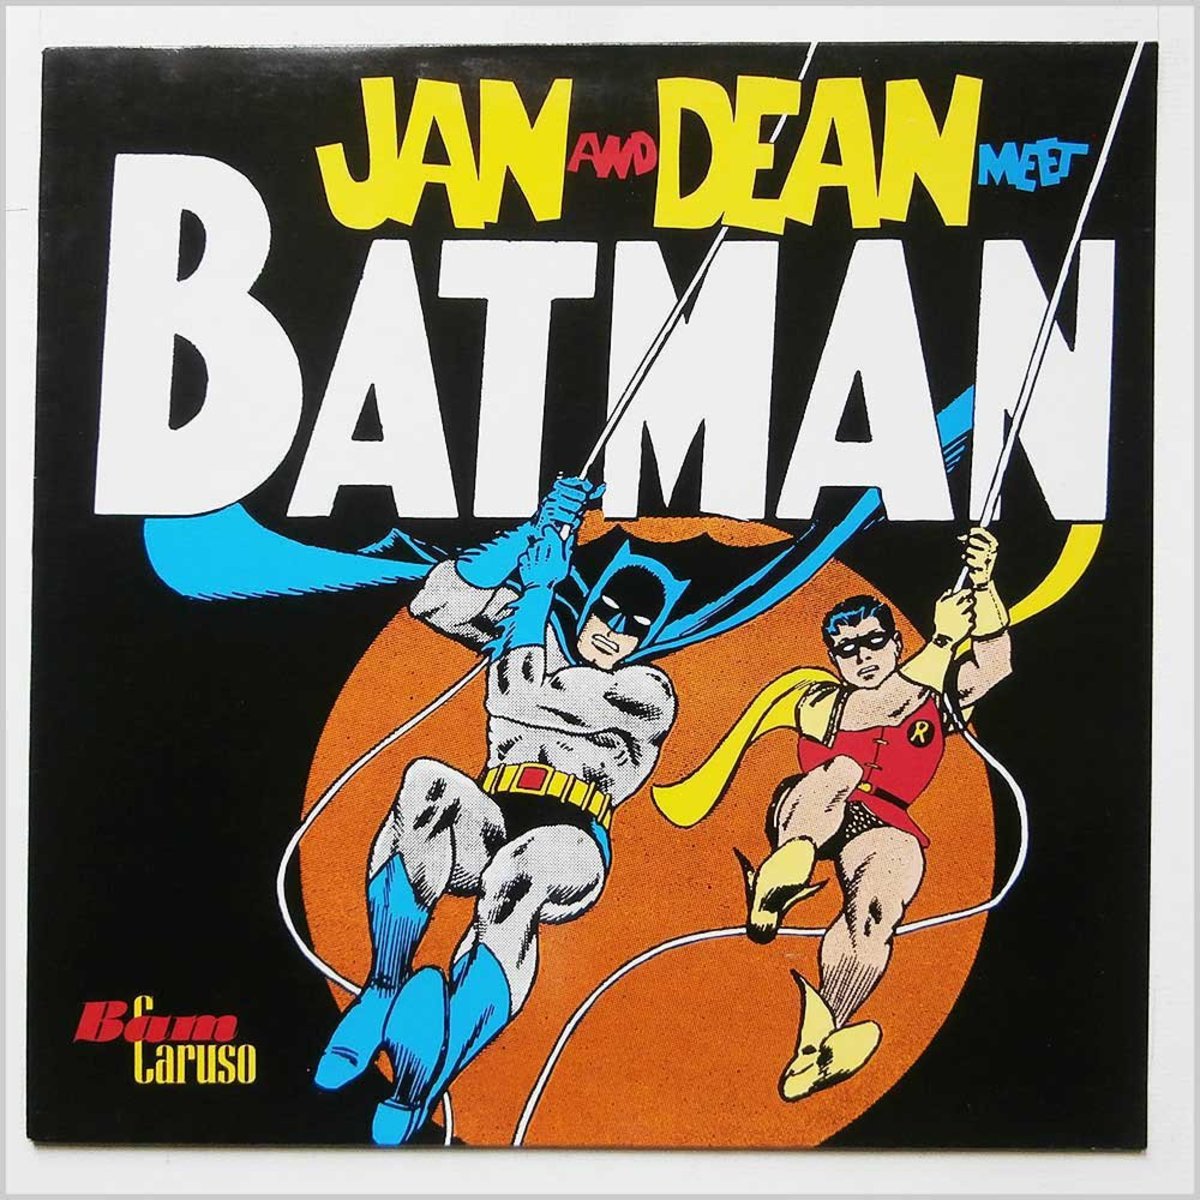 The Batman album with the dynamic duo